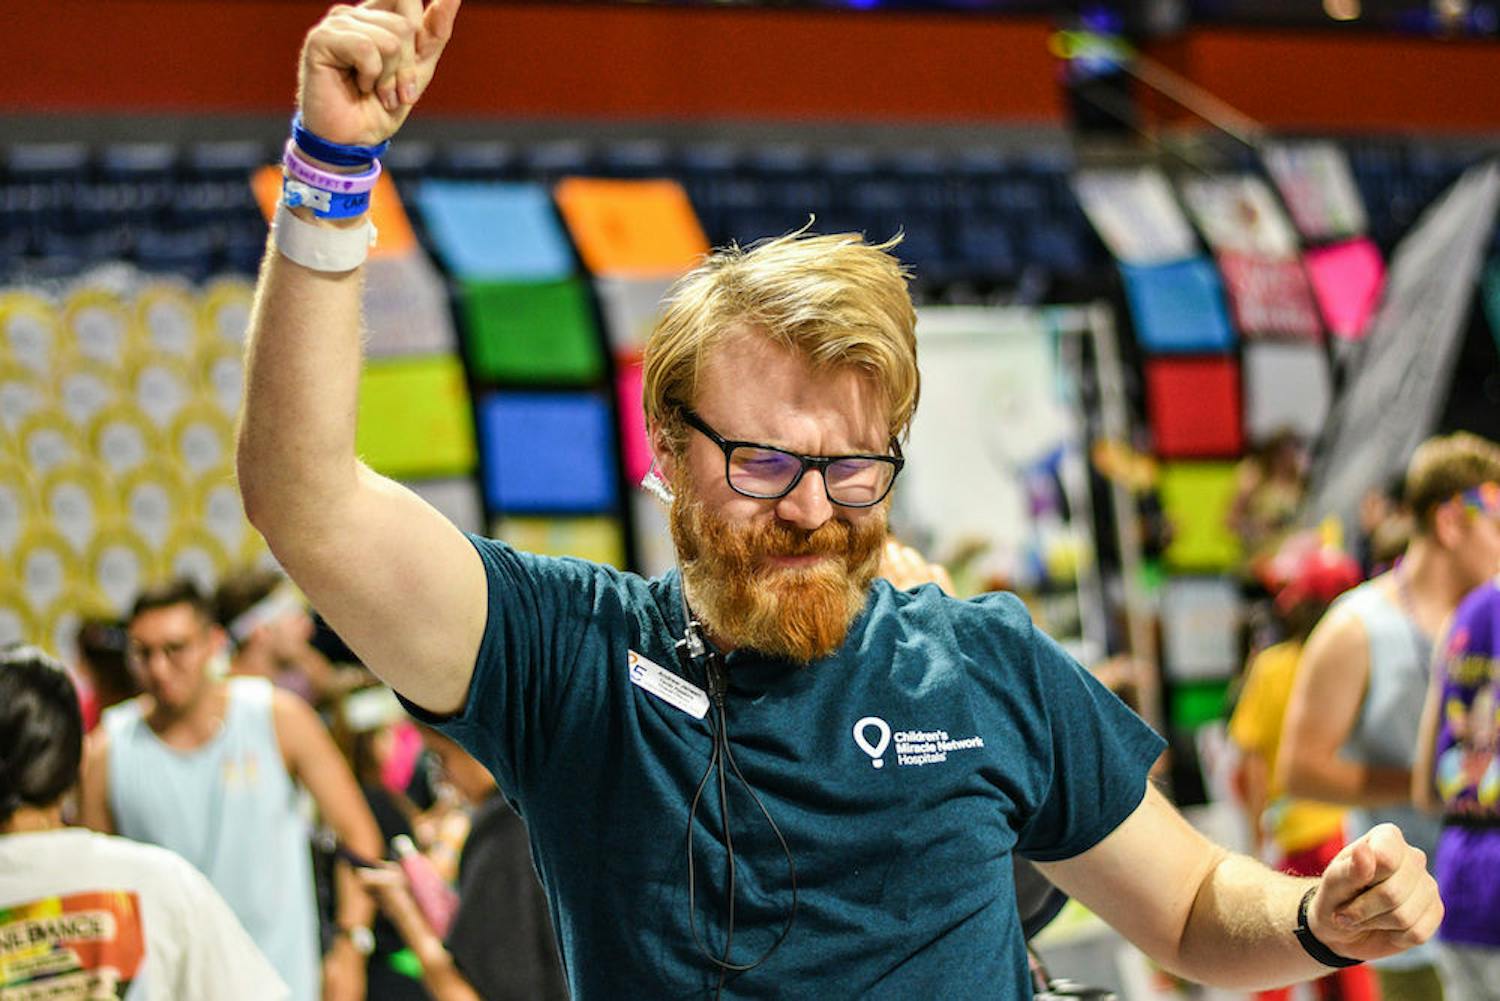 Andrew Jensen, the Overall Director of Dance Marathon 2019, rocks out during the Savants of Soul’s performance Saturday night in the O’Connell Center. Dance Marathon lasted for 26.2 hours and raised $3,230,025.23 for children at UF Health Shands Children’s Hospital and Children’s Miracle Network.